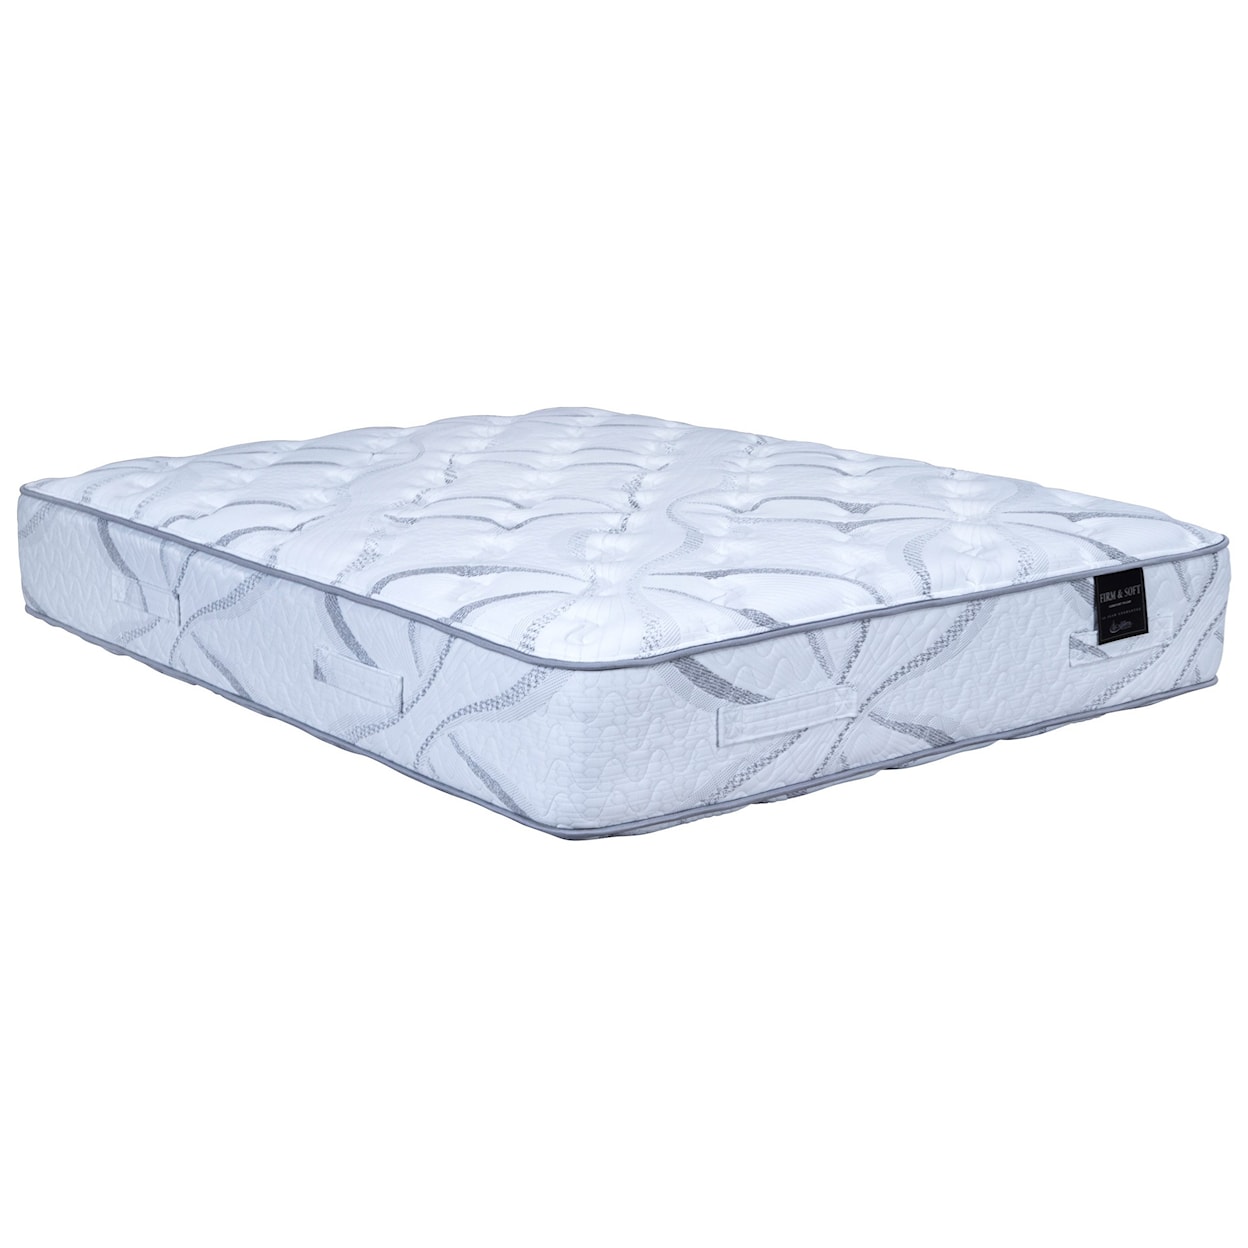 Capitol Bedding Firm and Soft II Plush Queen Two Sided Plush Mattress